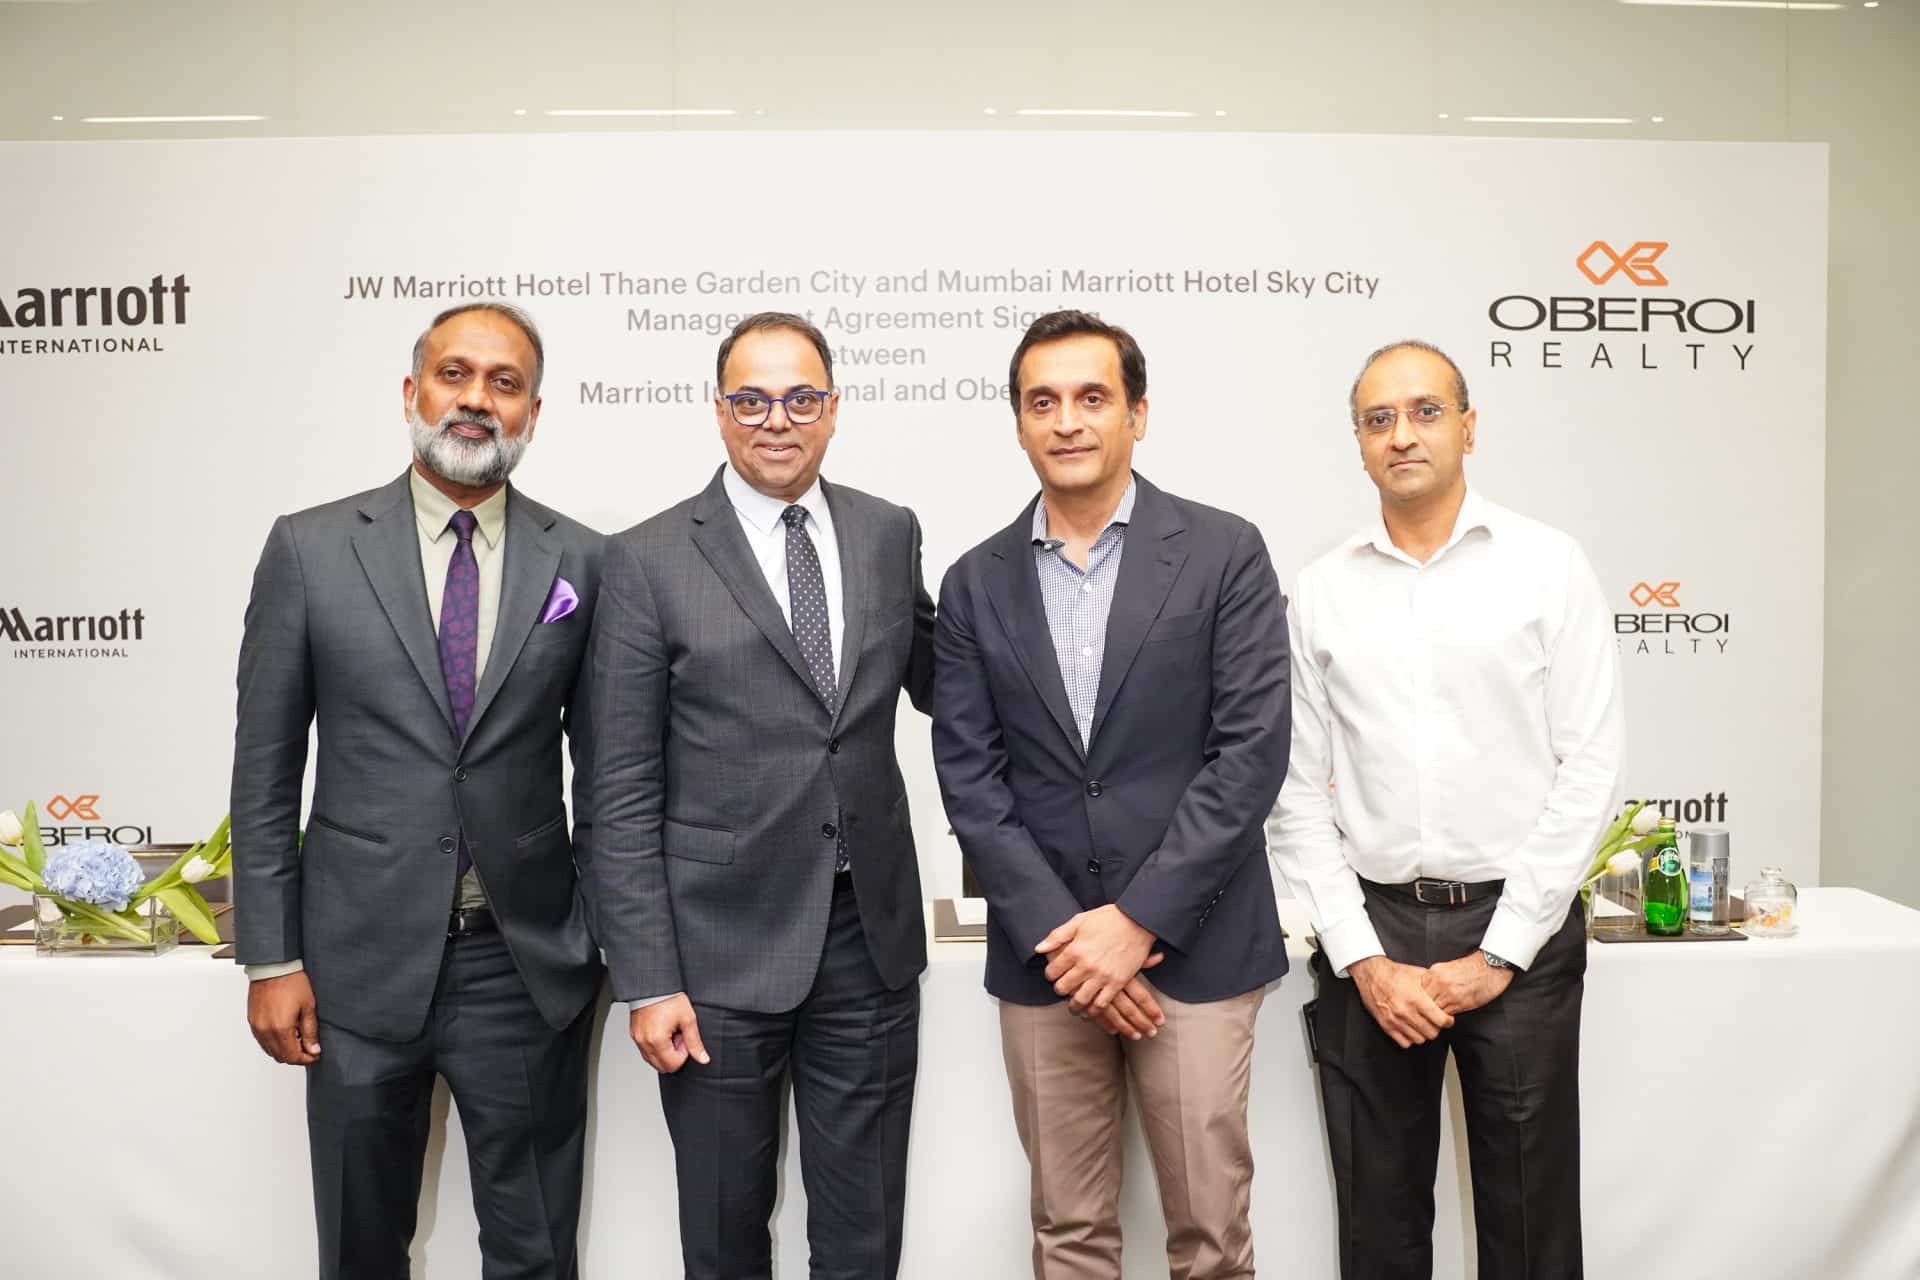 Oberoi Realty Redefines Upscale Hospitality along with JW Marriott